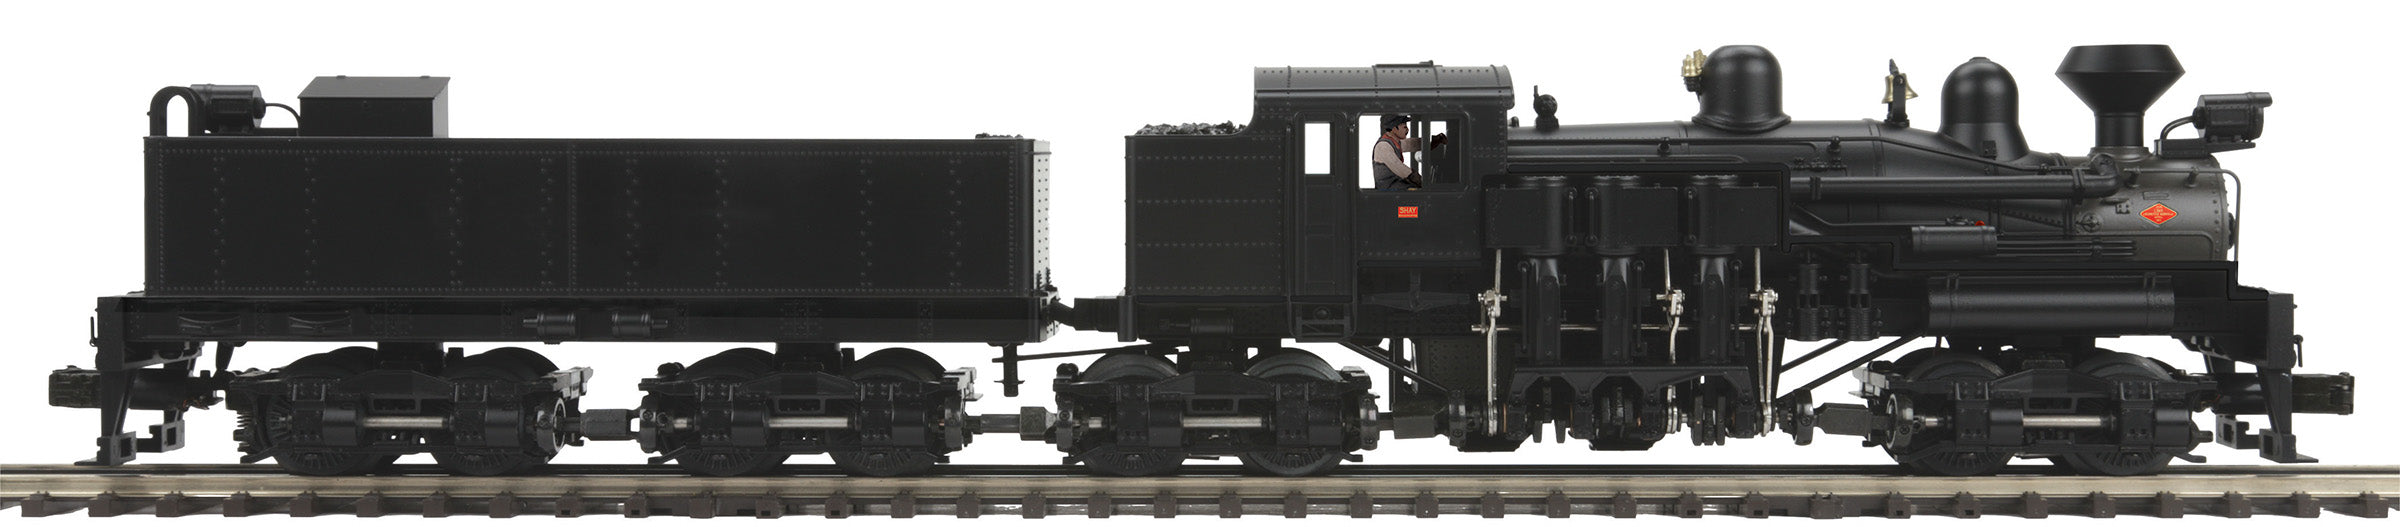 MTH 20-3885-1 - 4-Truck Shay Steam Engine "Unlettered" w/ PS3